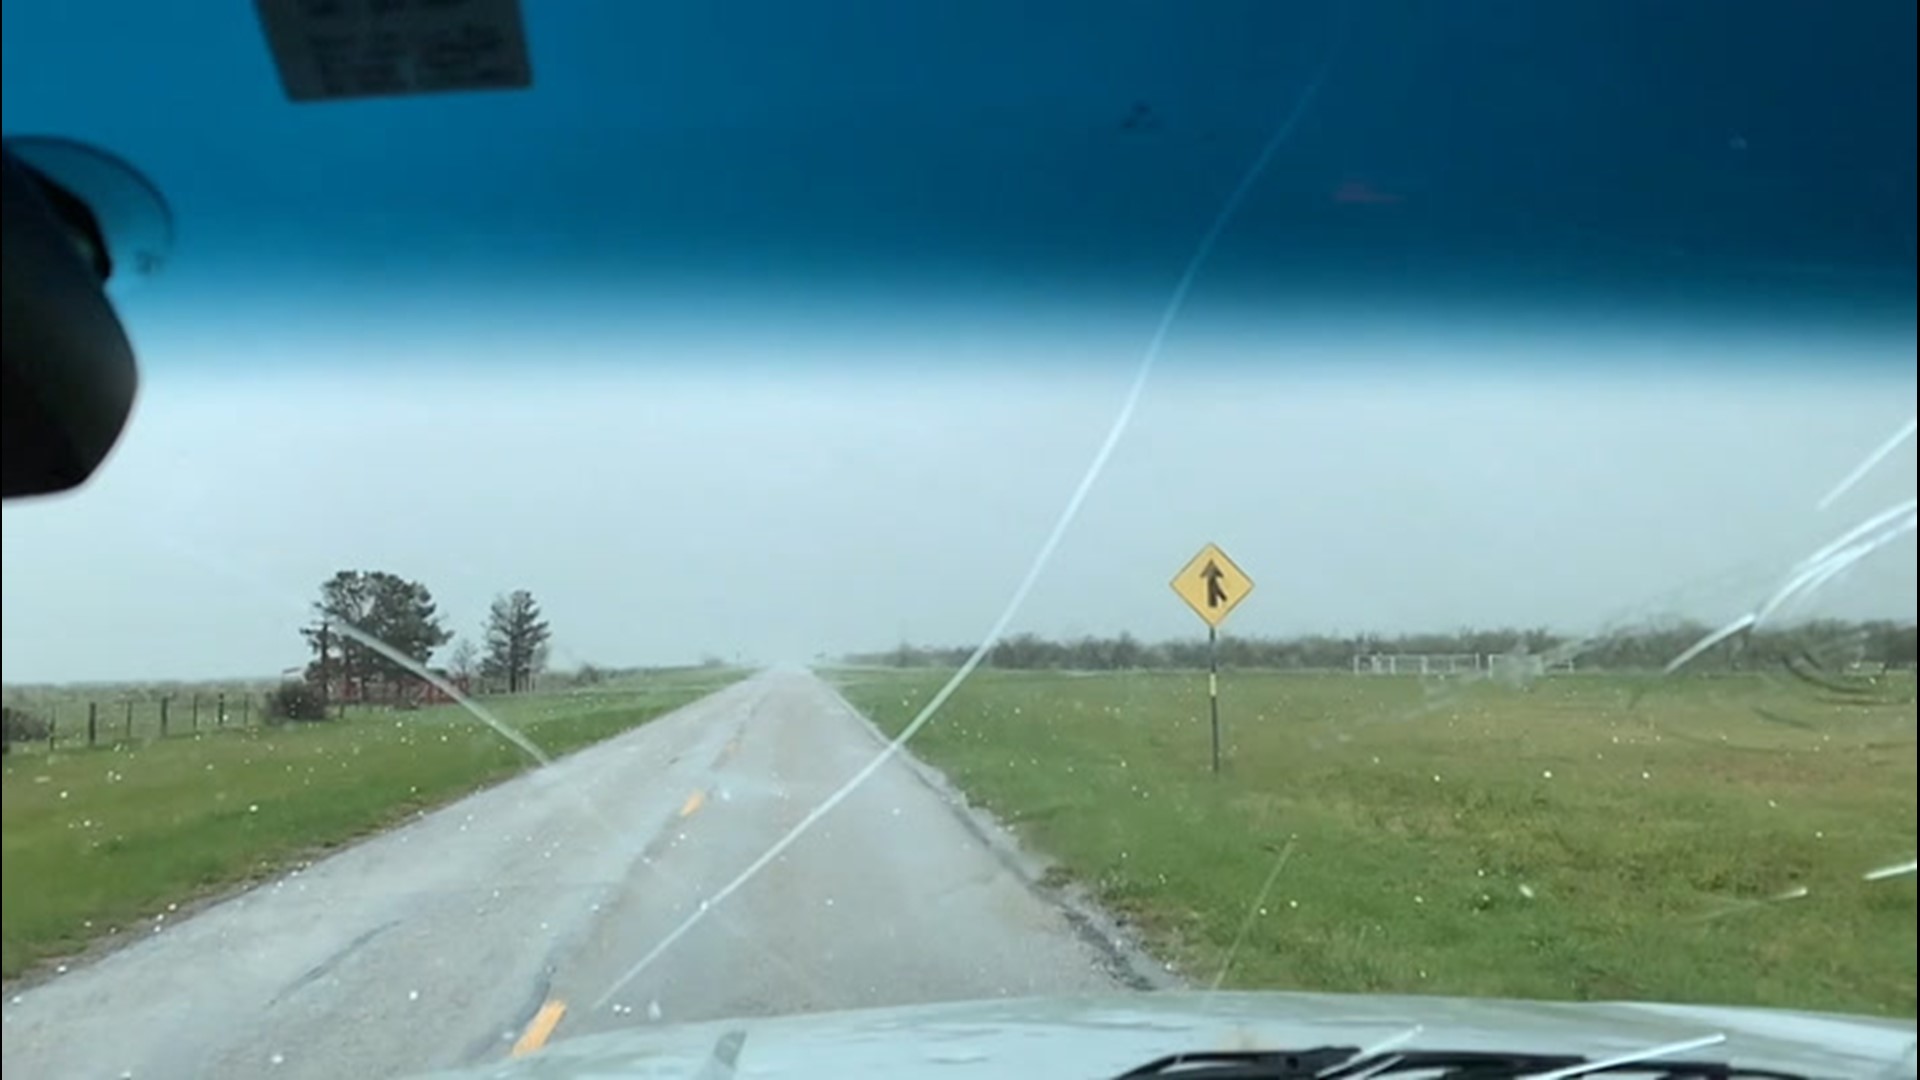 Field meteorologist Brett Adair was tracking severe storms when large hail began falling and damaged the vehicle while traveling in Guthrie, Texas.